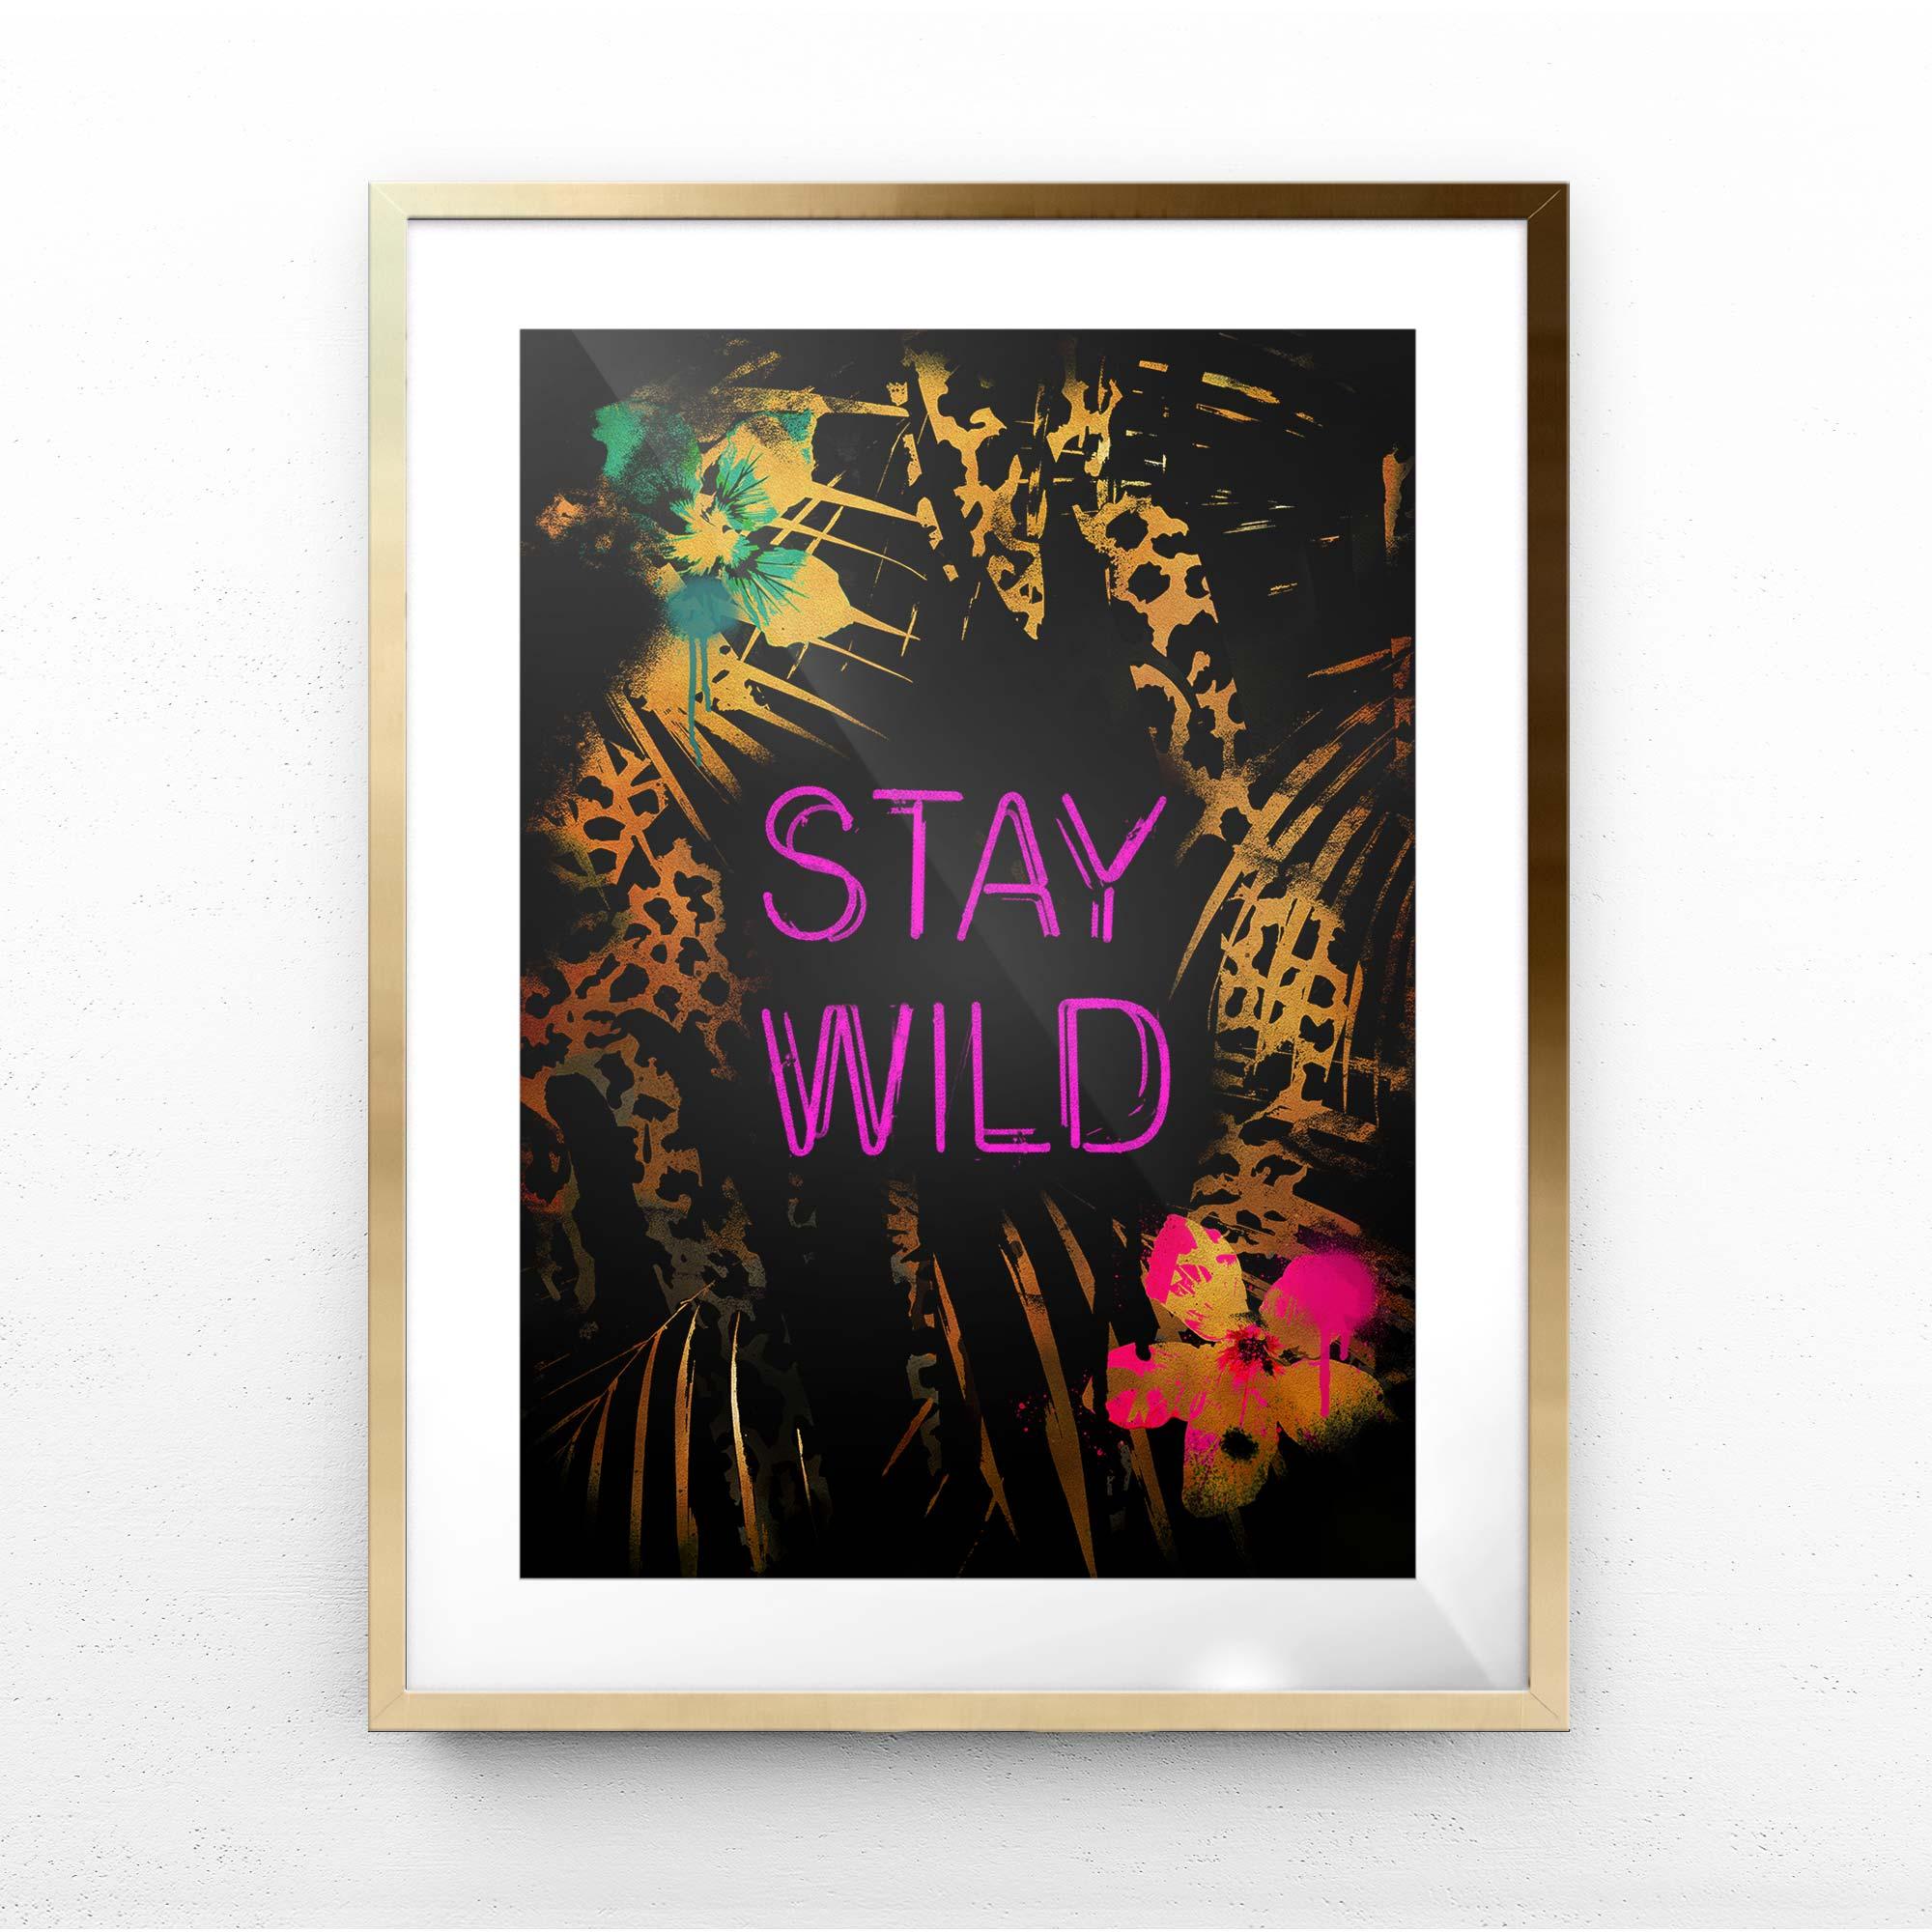 STAY WILD PRINT - Afterhours Gallery 